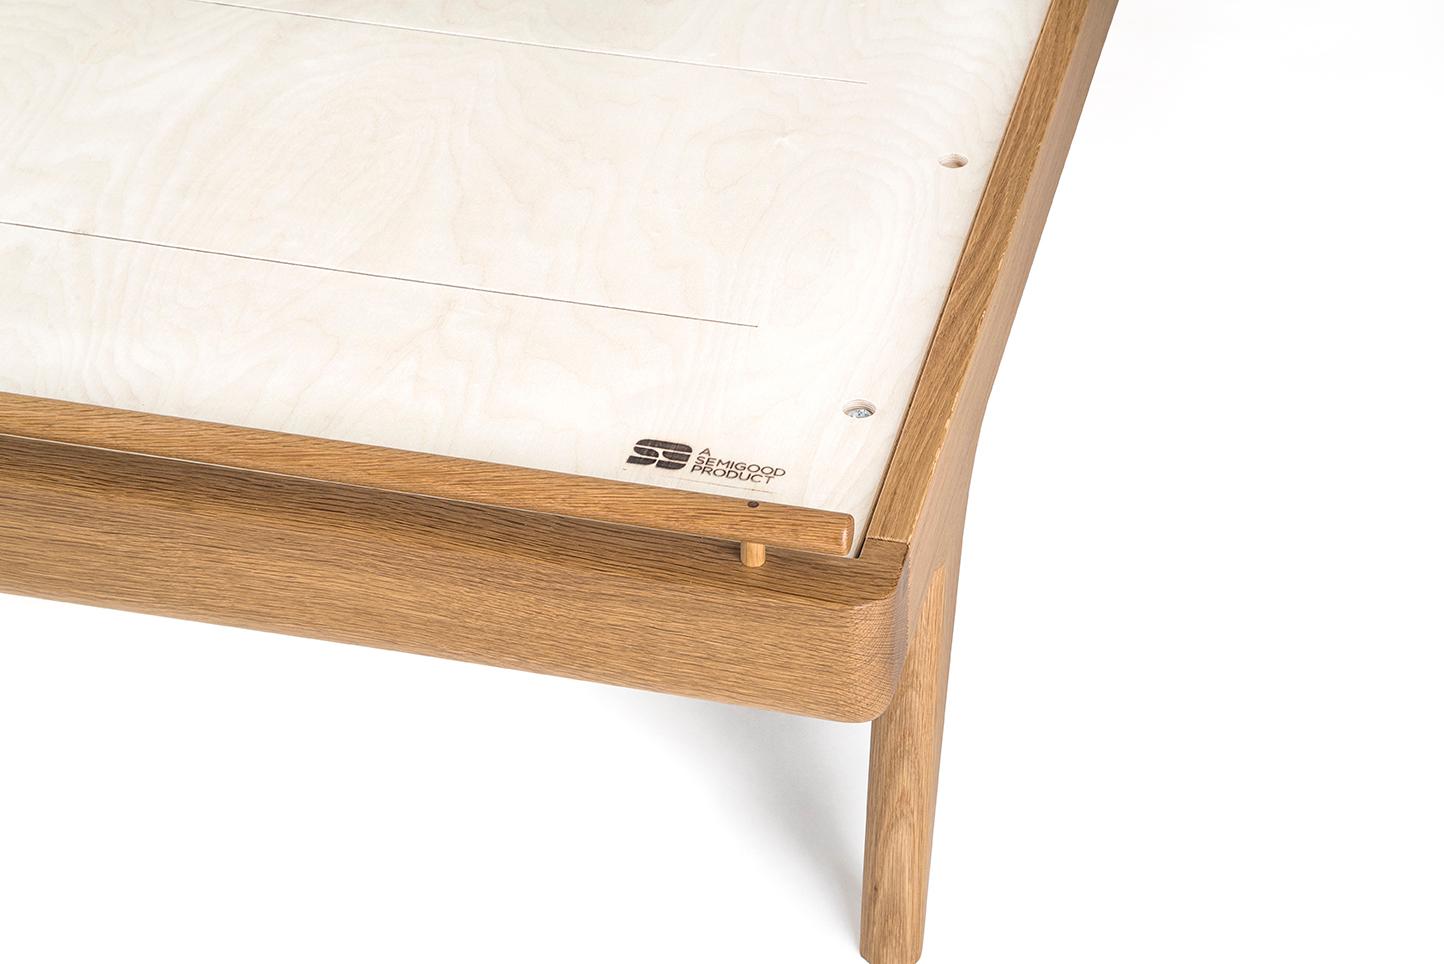 This listing is for a Queen Rian Bed in White Oak with Kraft Danish Cord. Custom options available. 

A good bed is hard to find, but a Semigood bed is hard to beat. The Rian Bed features a two panel woven Danish cord headboard making for one of the